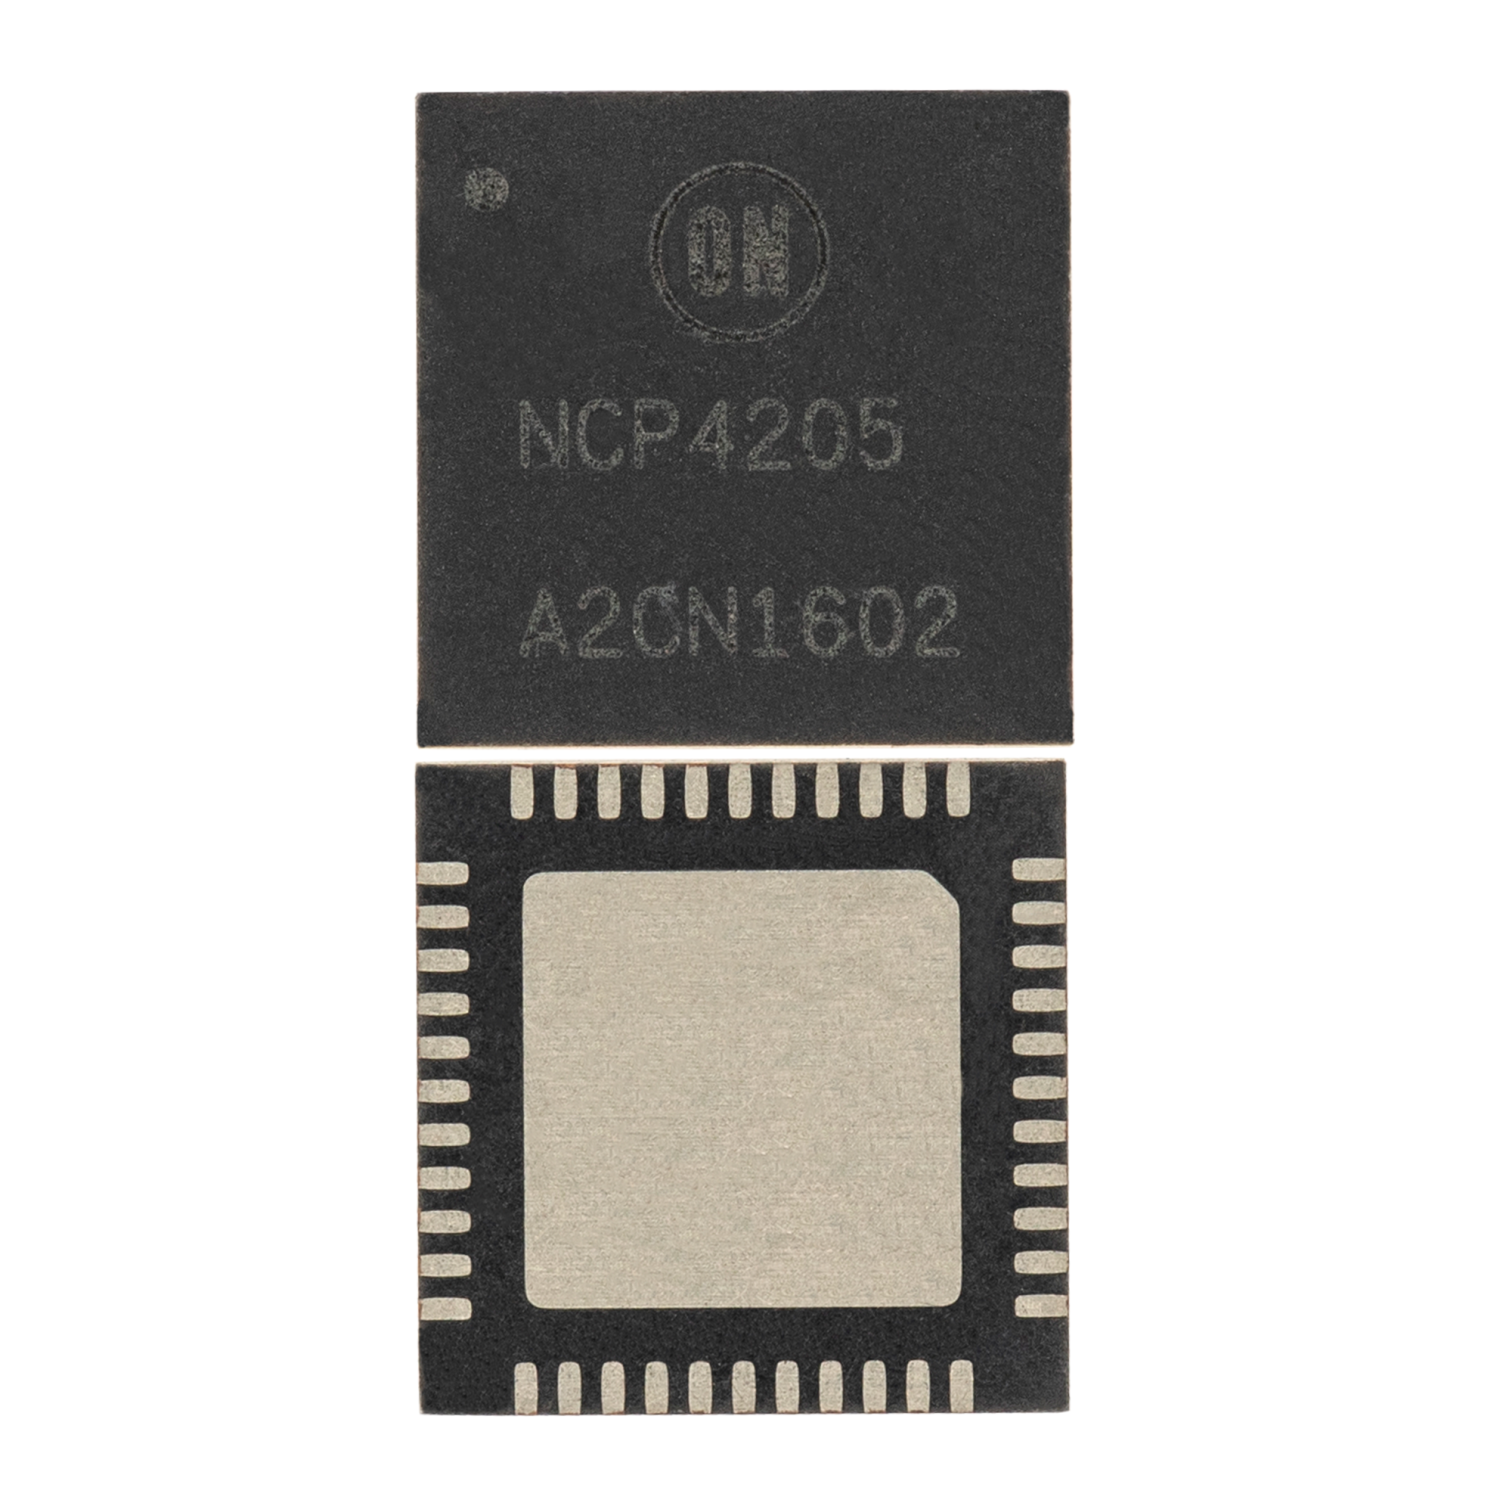 Replacement Power Management IC Compatible With Xbox One X (NCP4205)